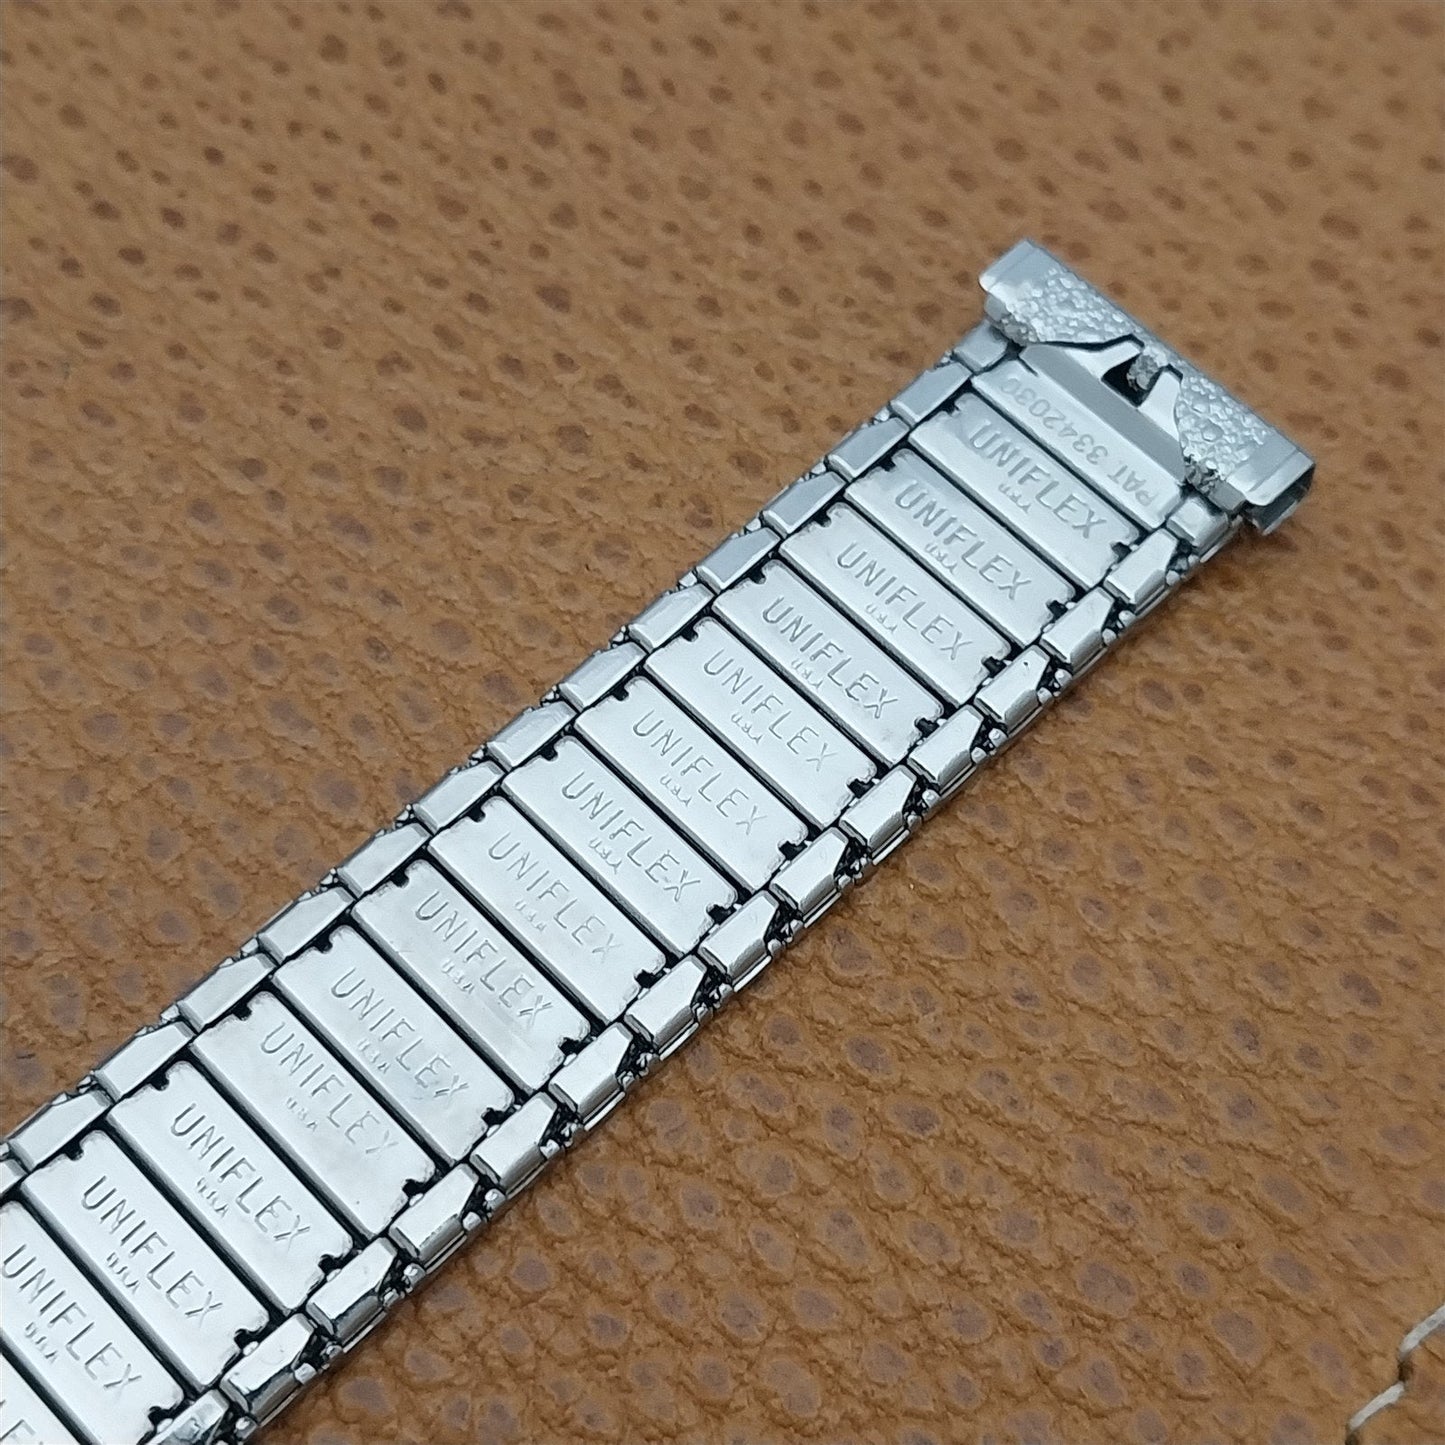 17.2mm Uniflex Slim Stainless Steel Expansion 1960s Vintage Watch Band